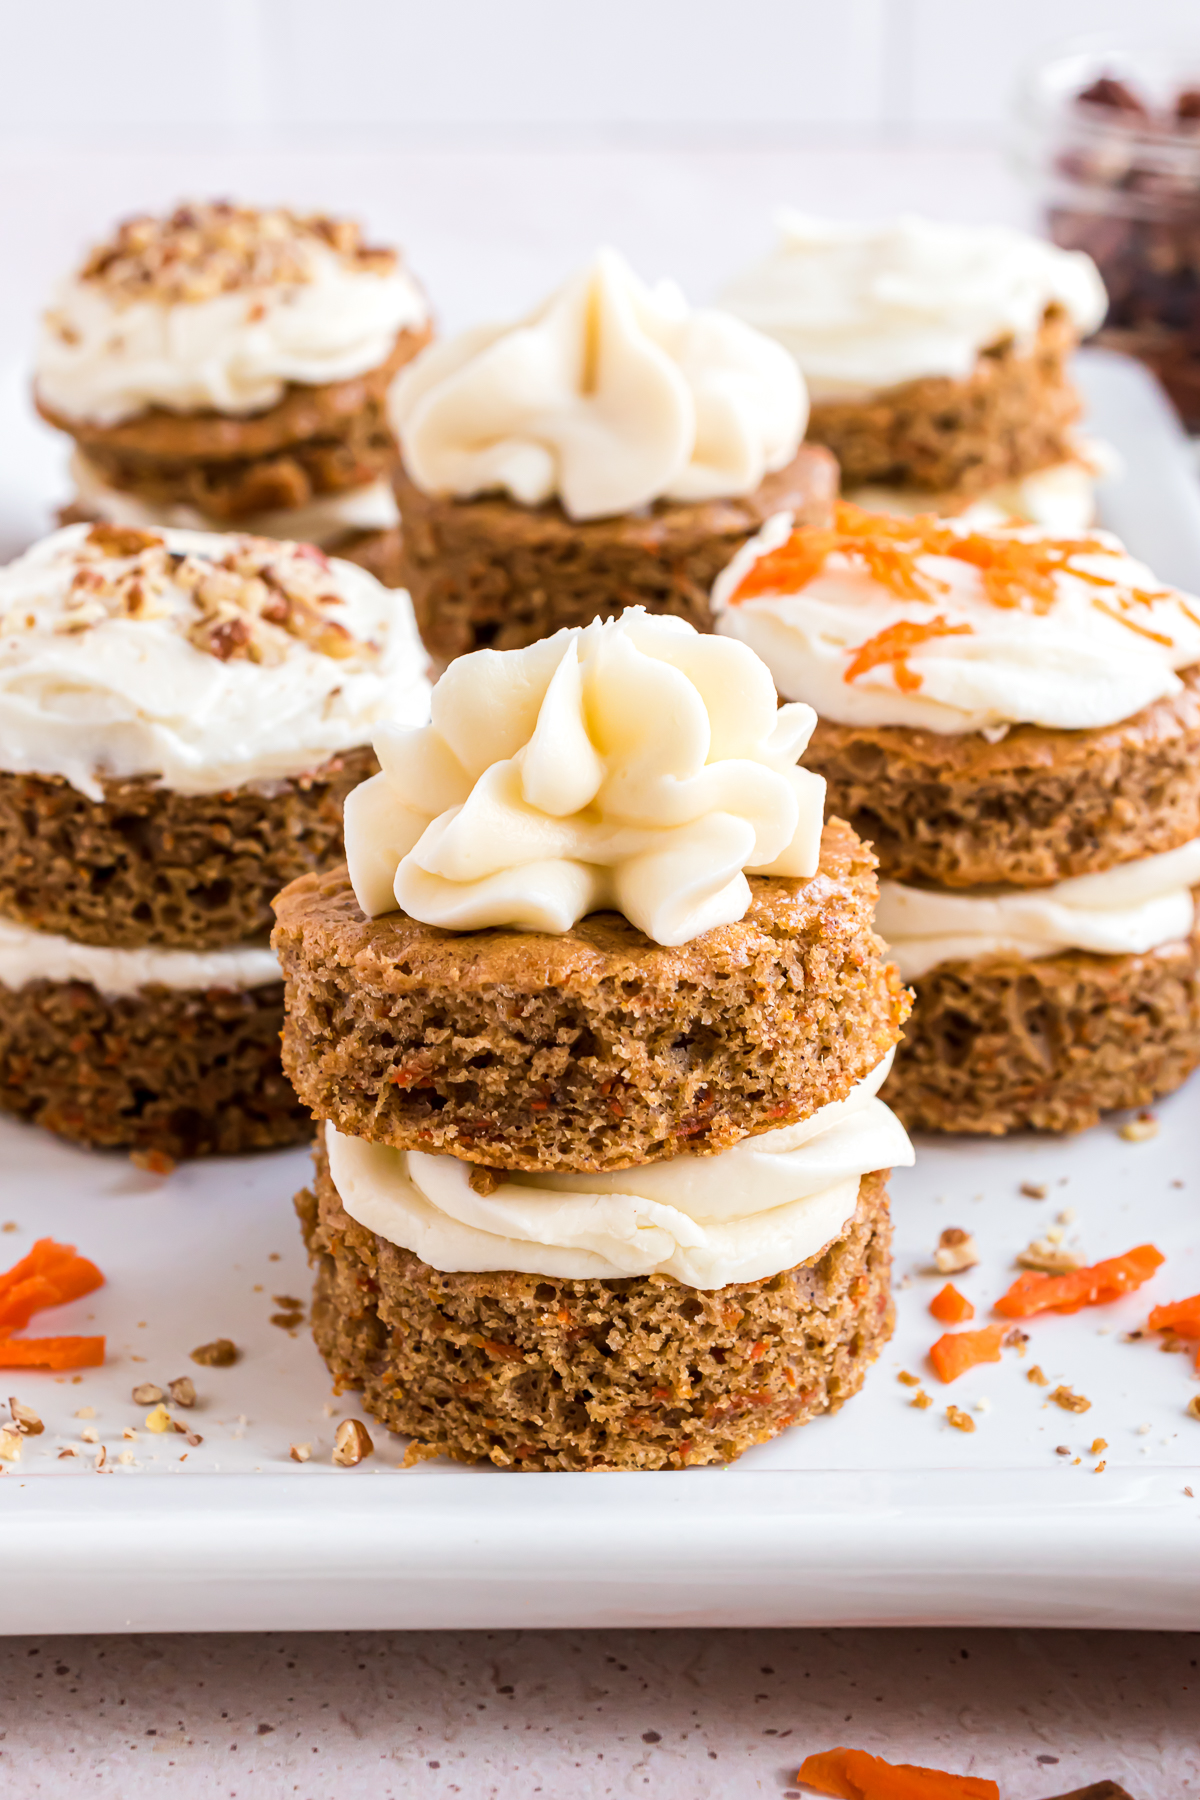 An photo showing a group of double-layered mini carrot cakes with piped frosting on top.